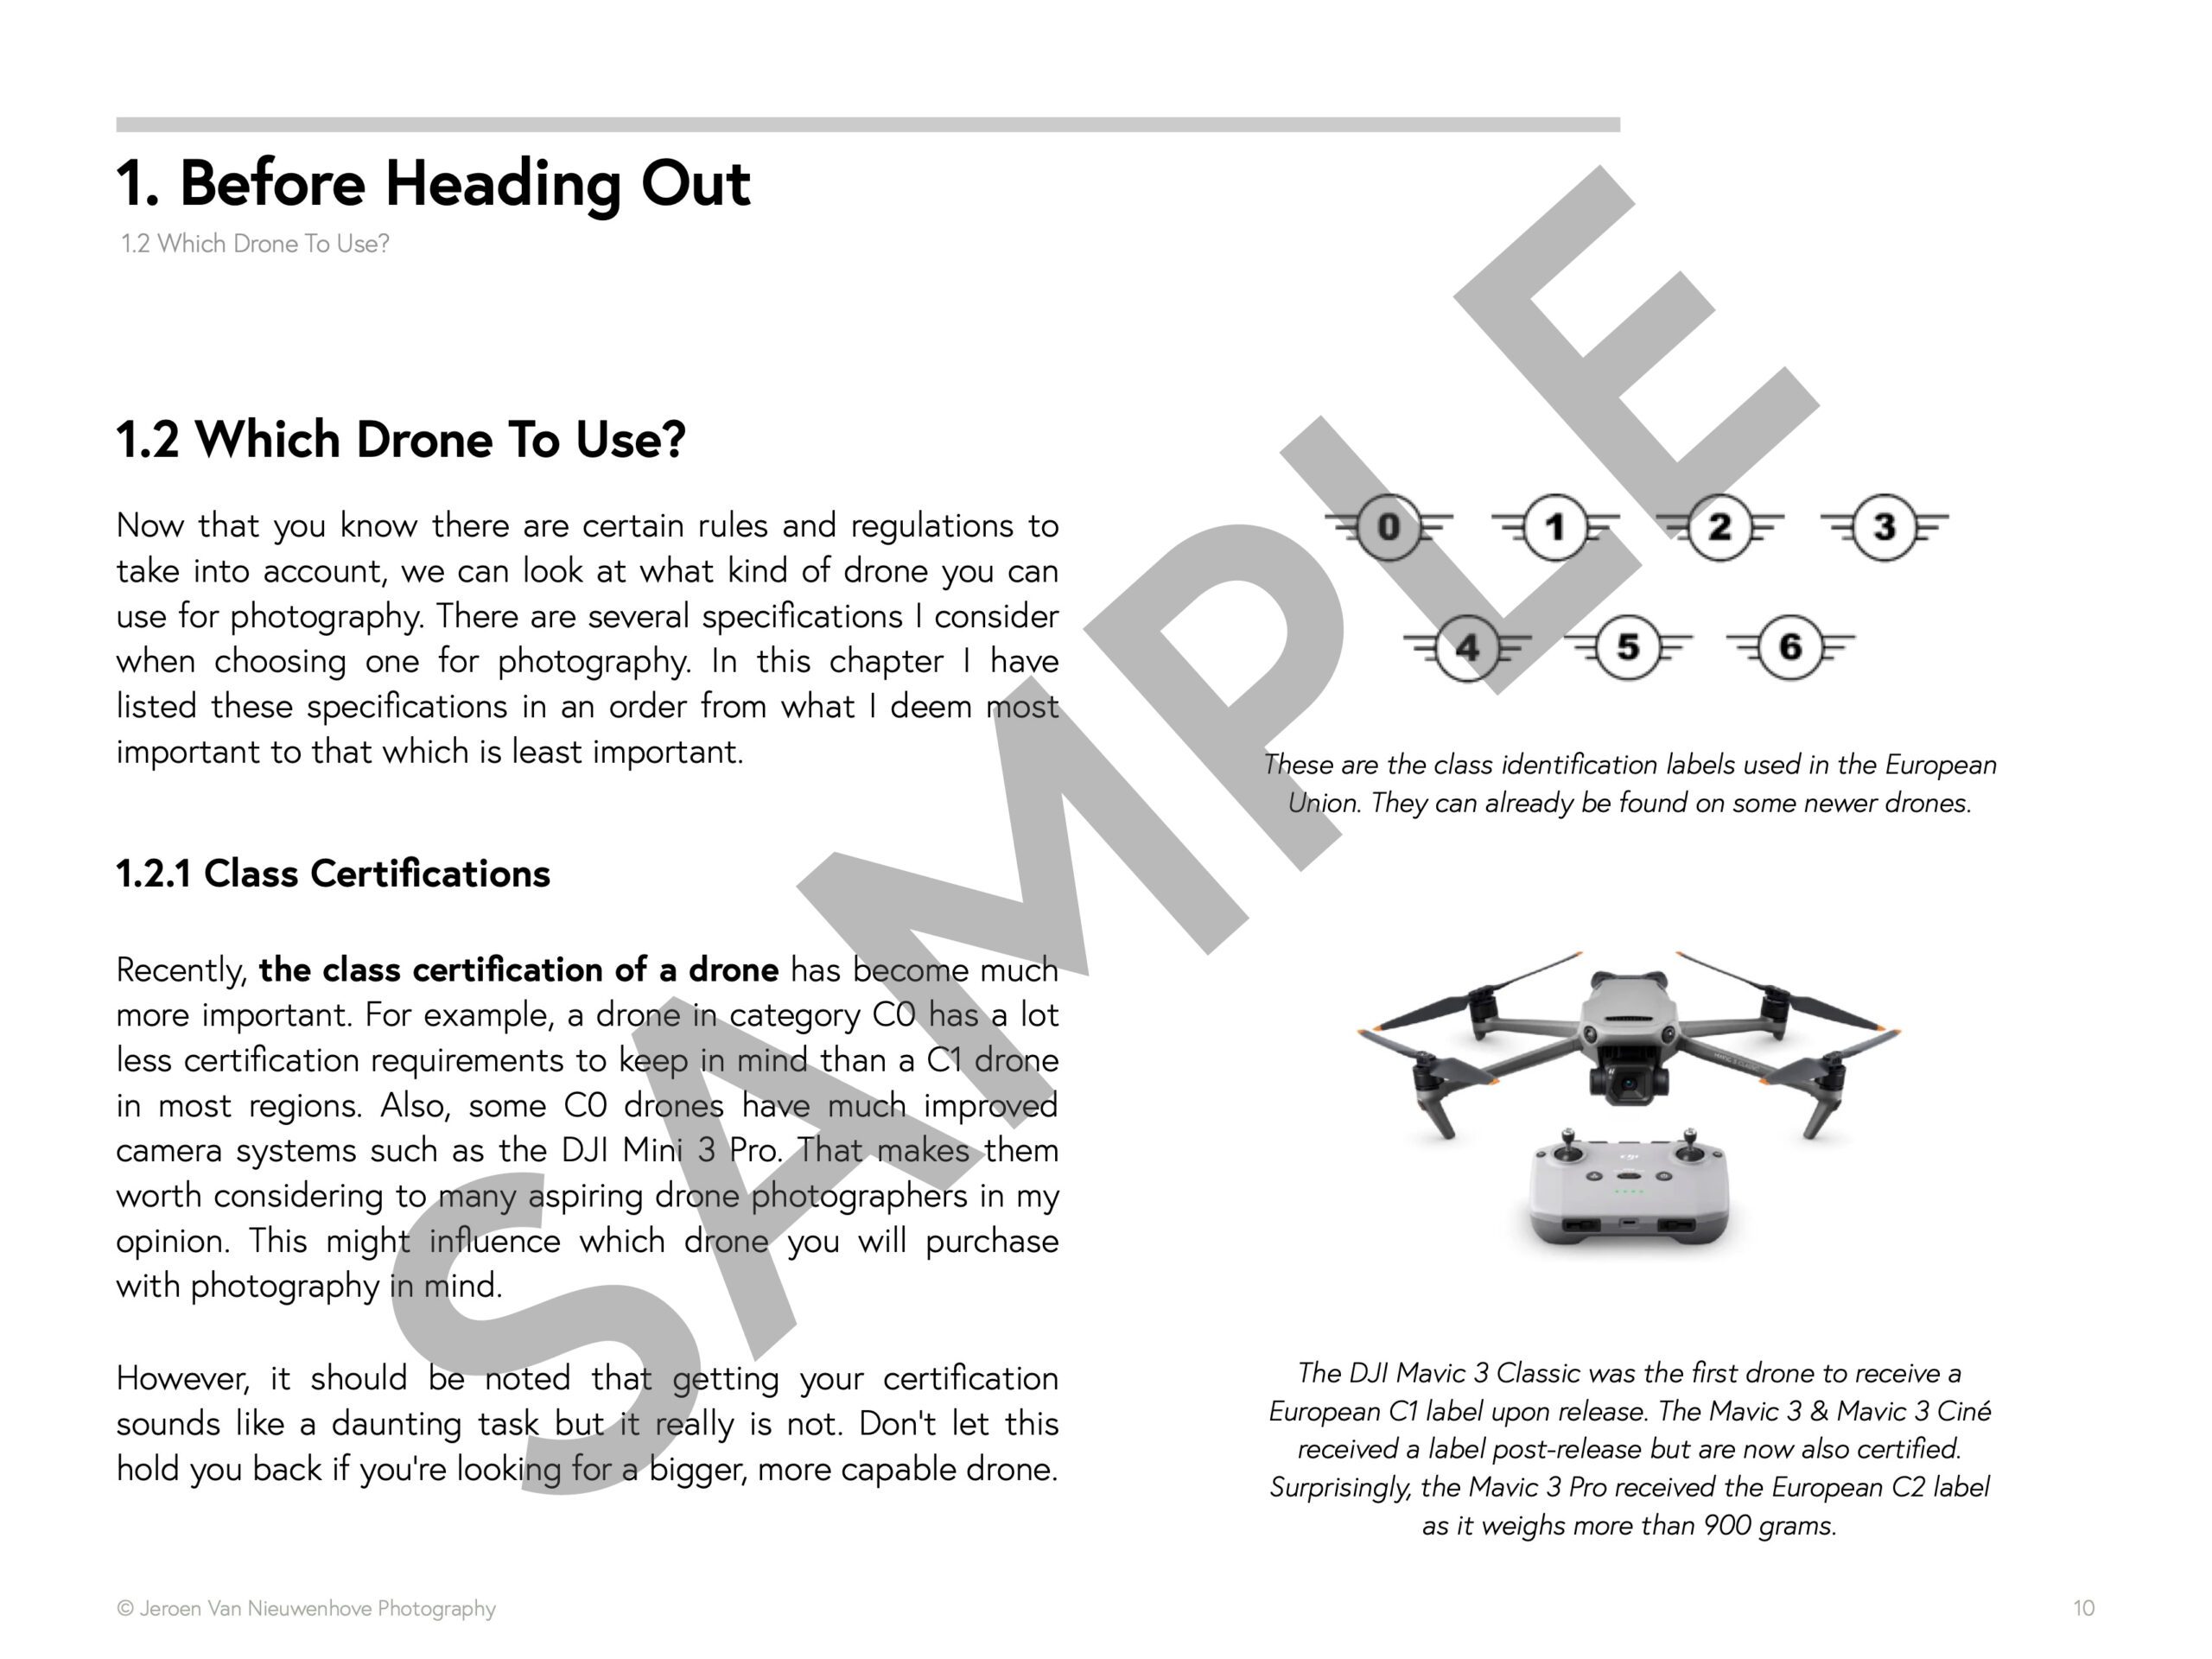 Improve Your Drone Photography With My Updated E-Book!